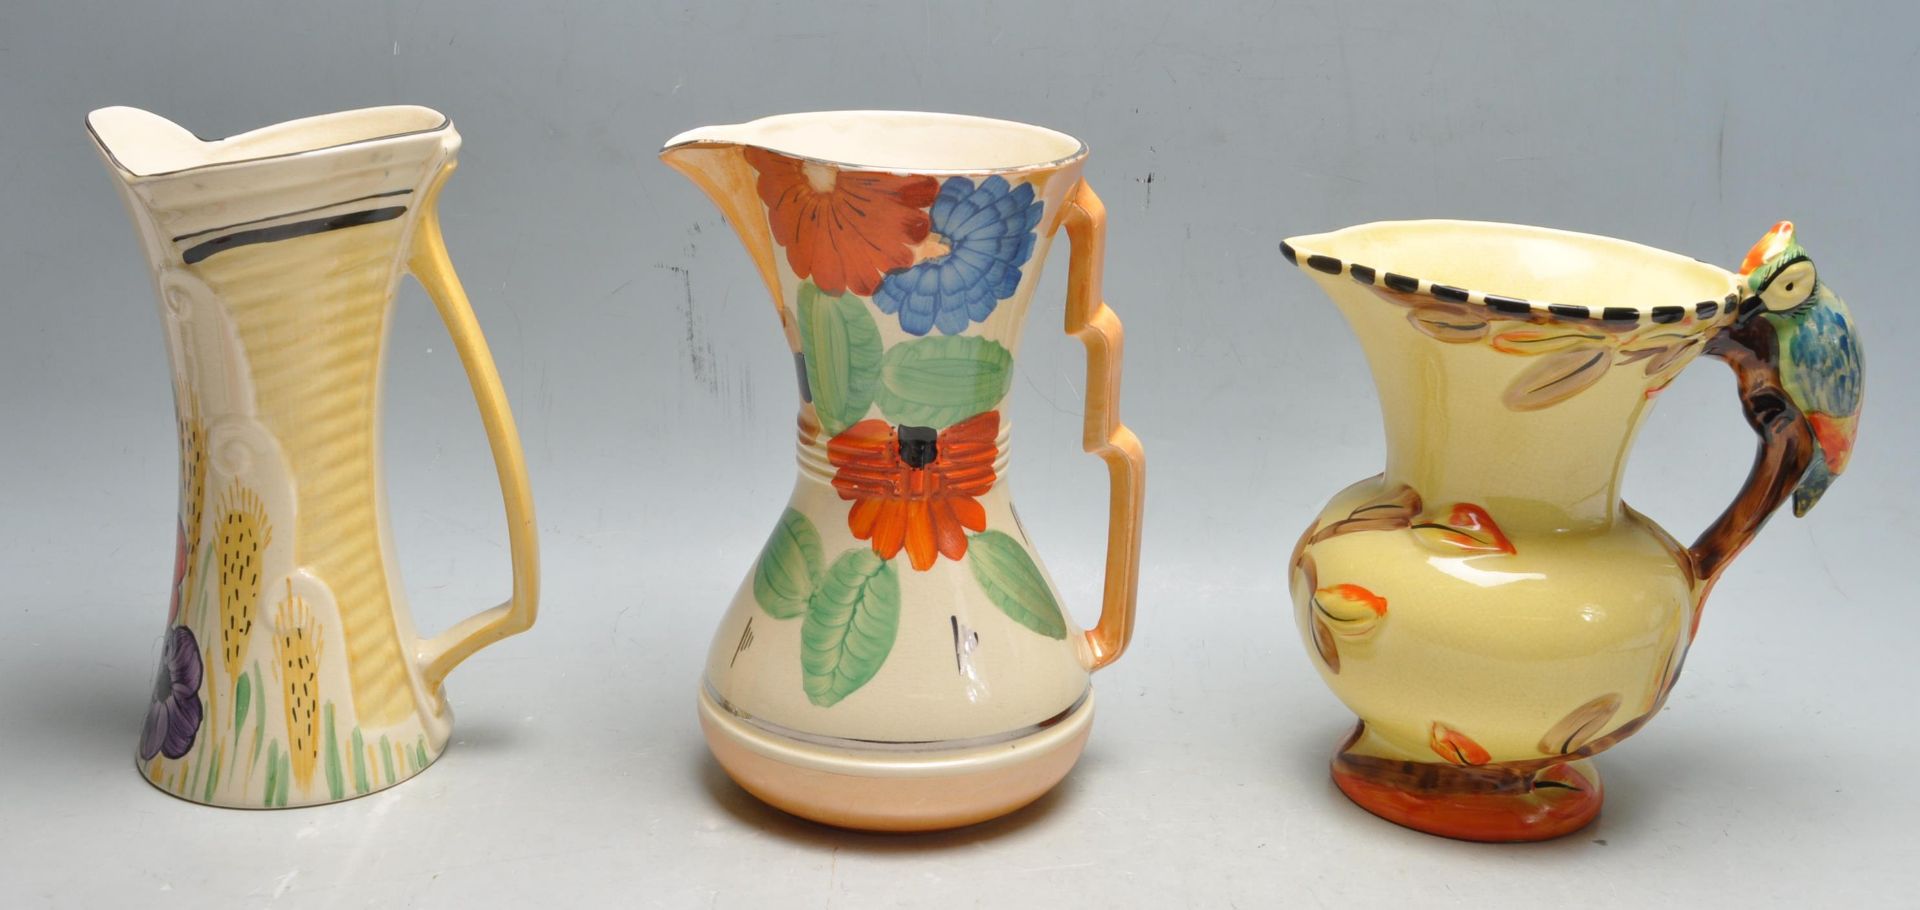 COLLECTION OF THREE ART DECO EARLY 20TH CENTURY JUGS